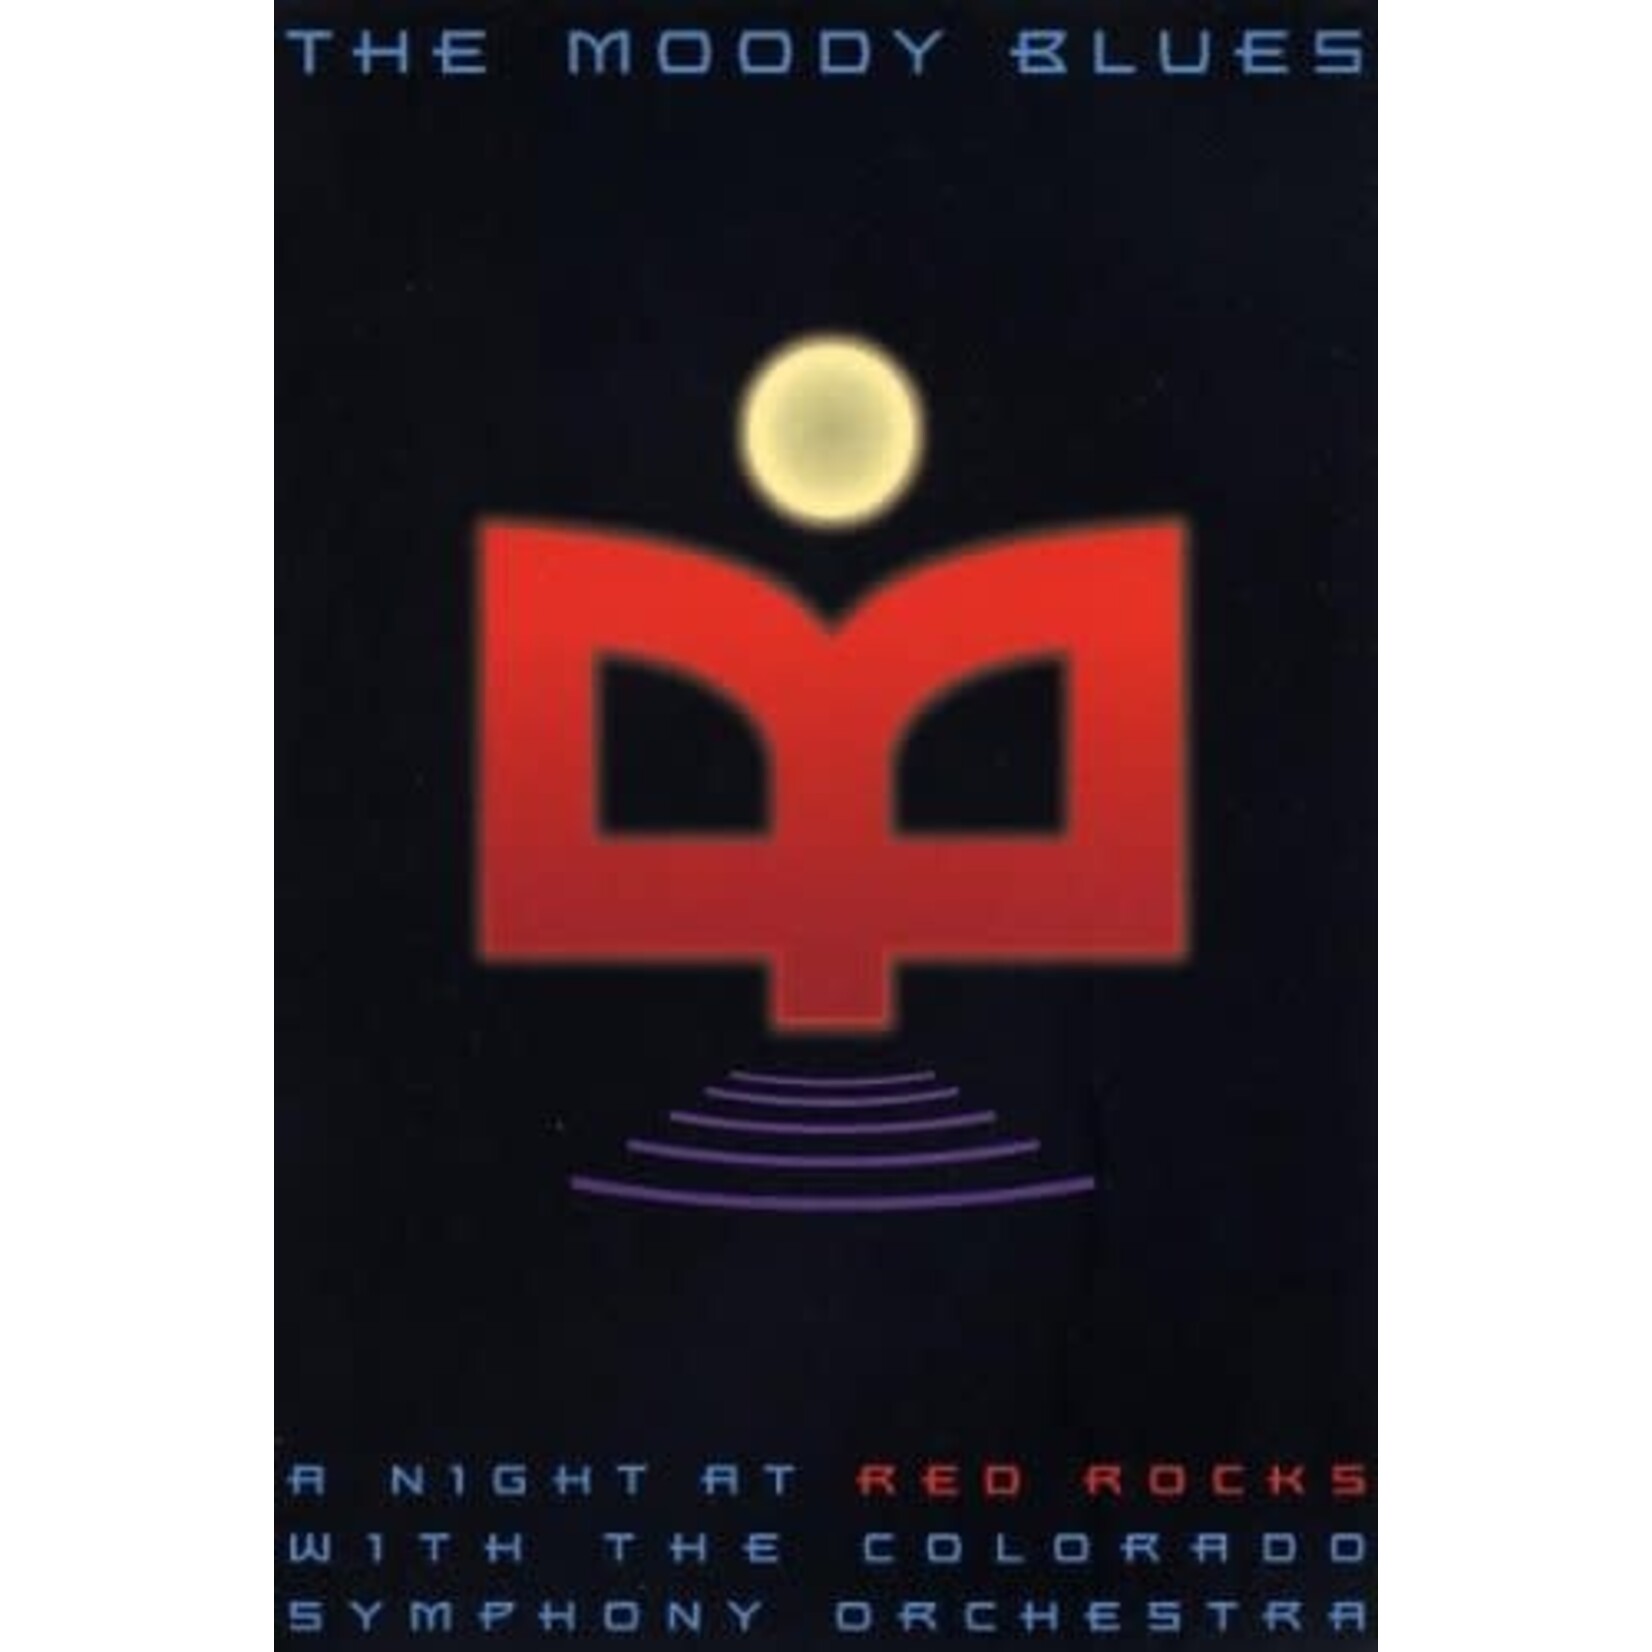 Moody Blues - A Night At Red Rocks With The Colorado Symphony Orchestra [USED DVD]